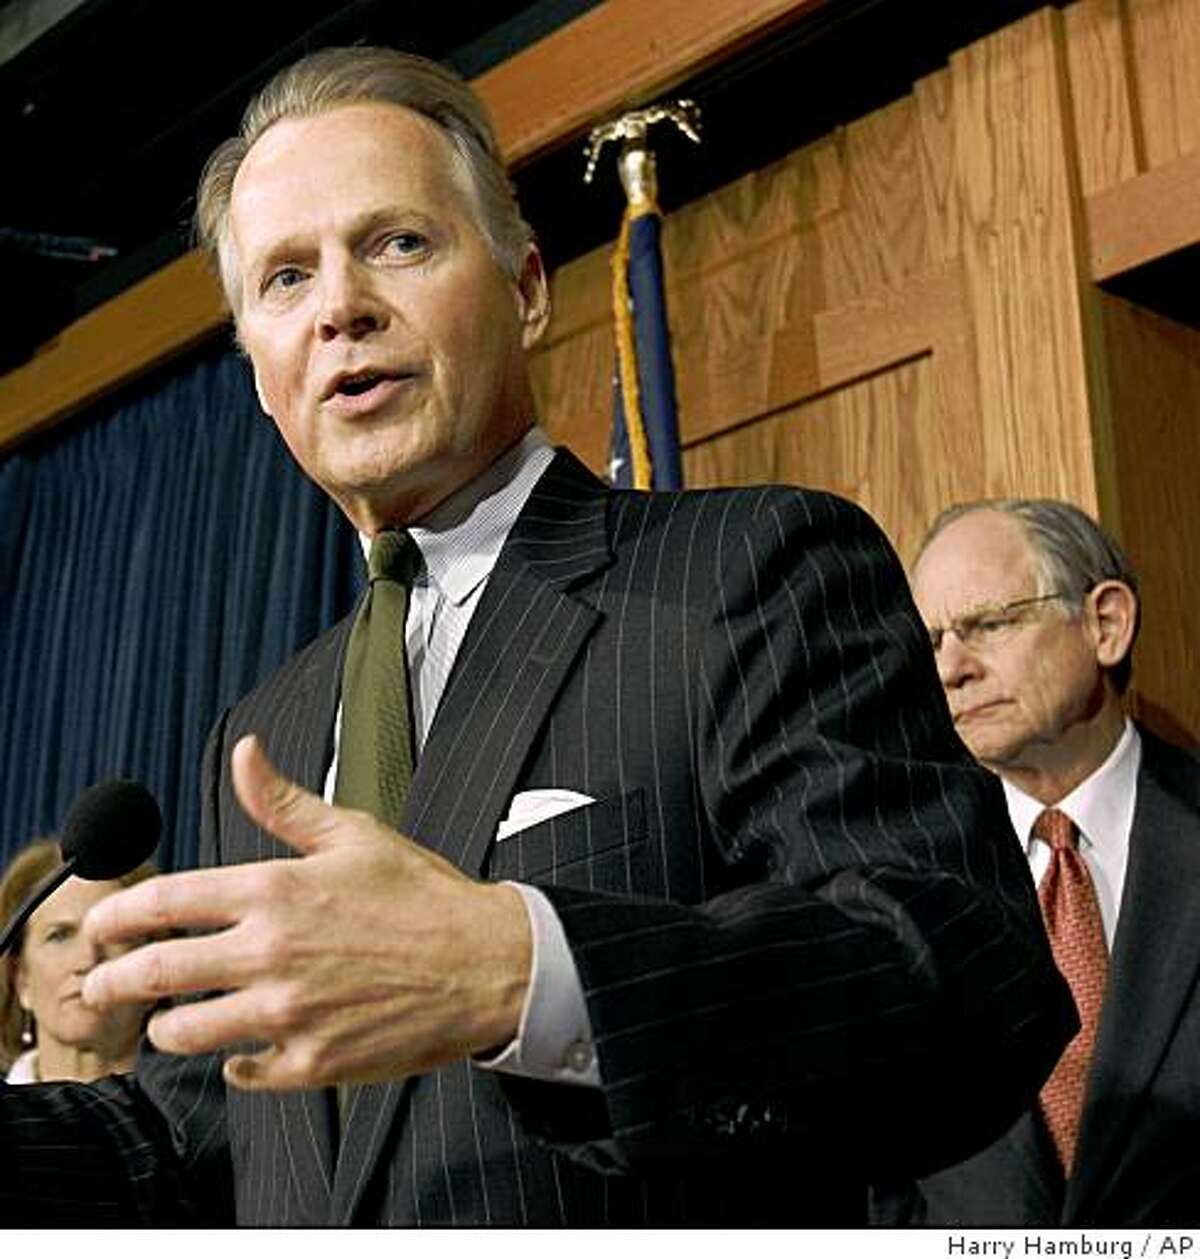 Rep. David Dreier R-Calif., flanked by Rep. Shelley Moore Capito R-W.Va., left, and Rep. Mike Castle R-Del., gestures during a news conference on Capitol Hill in Washington, Wednesday, March 25, 2009, to discuss the budget. (AP Photo/Harry Hamburg)